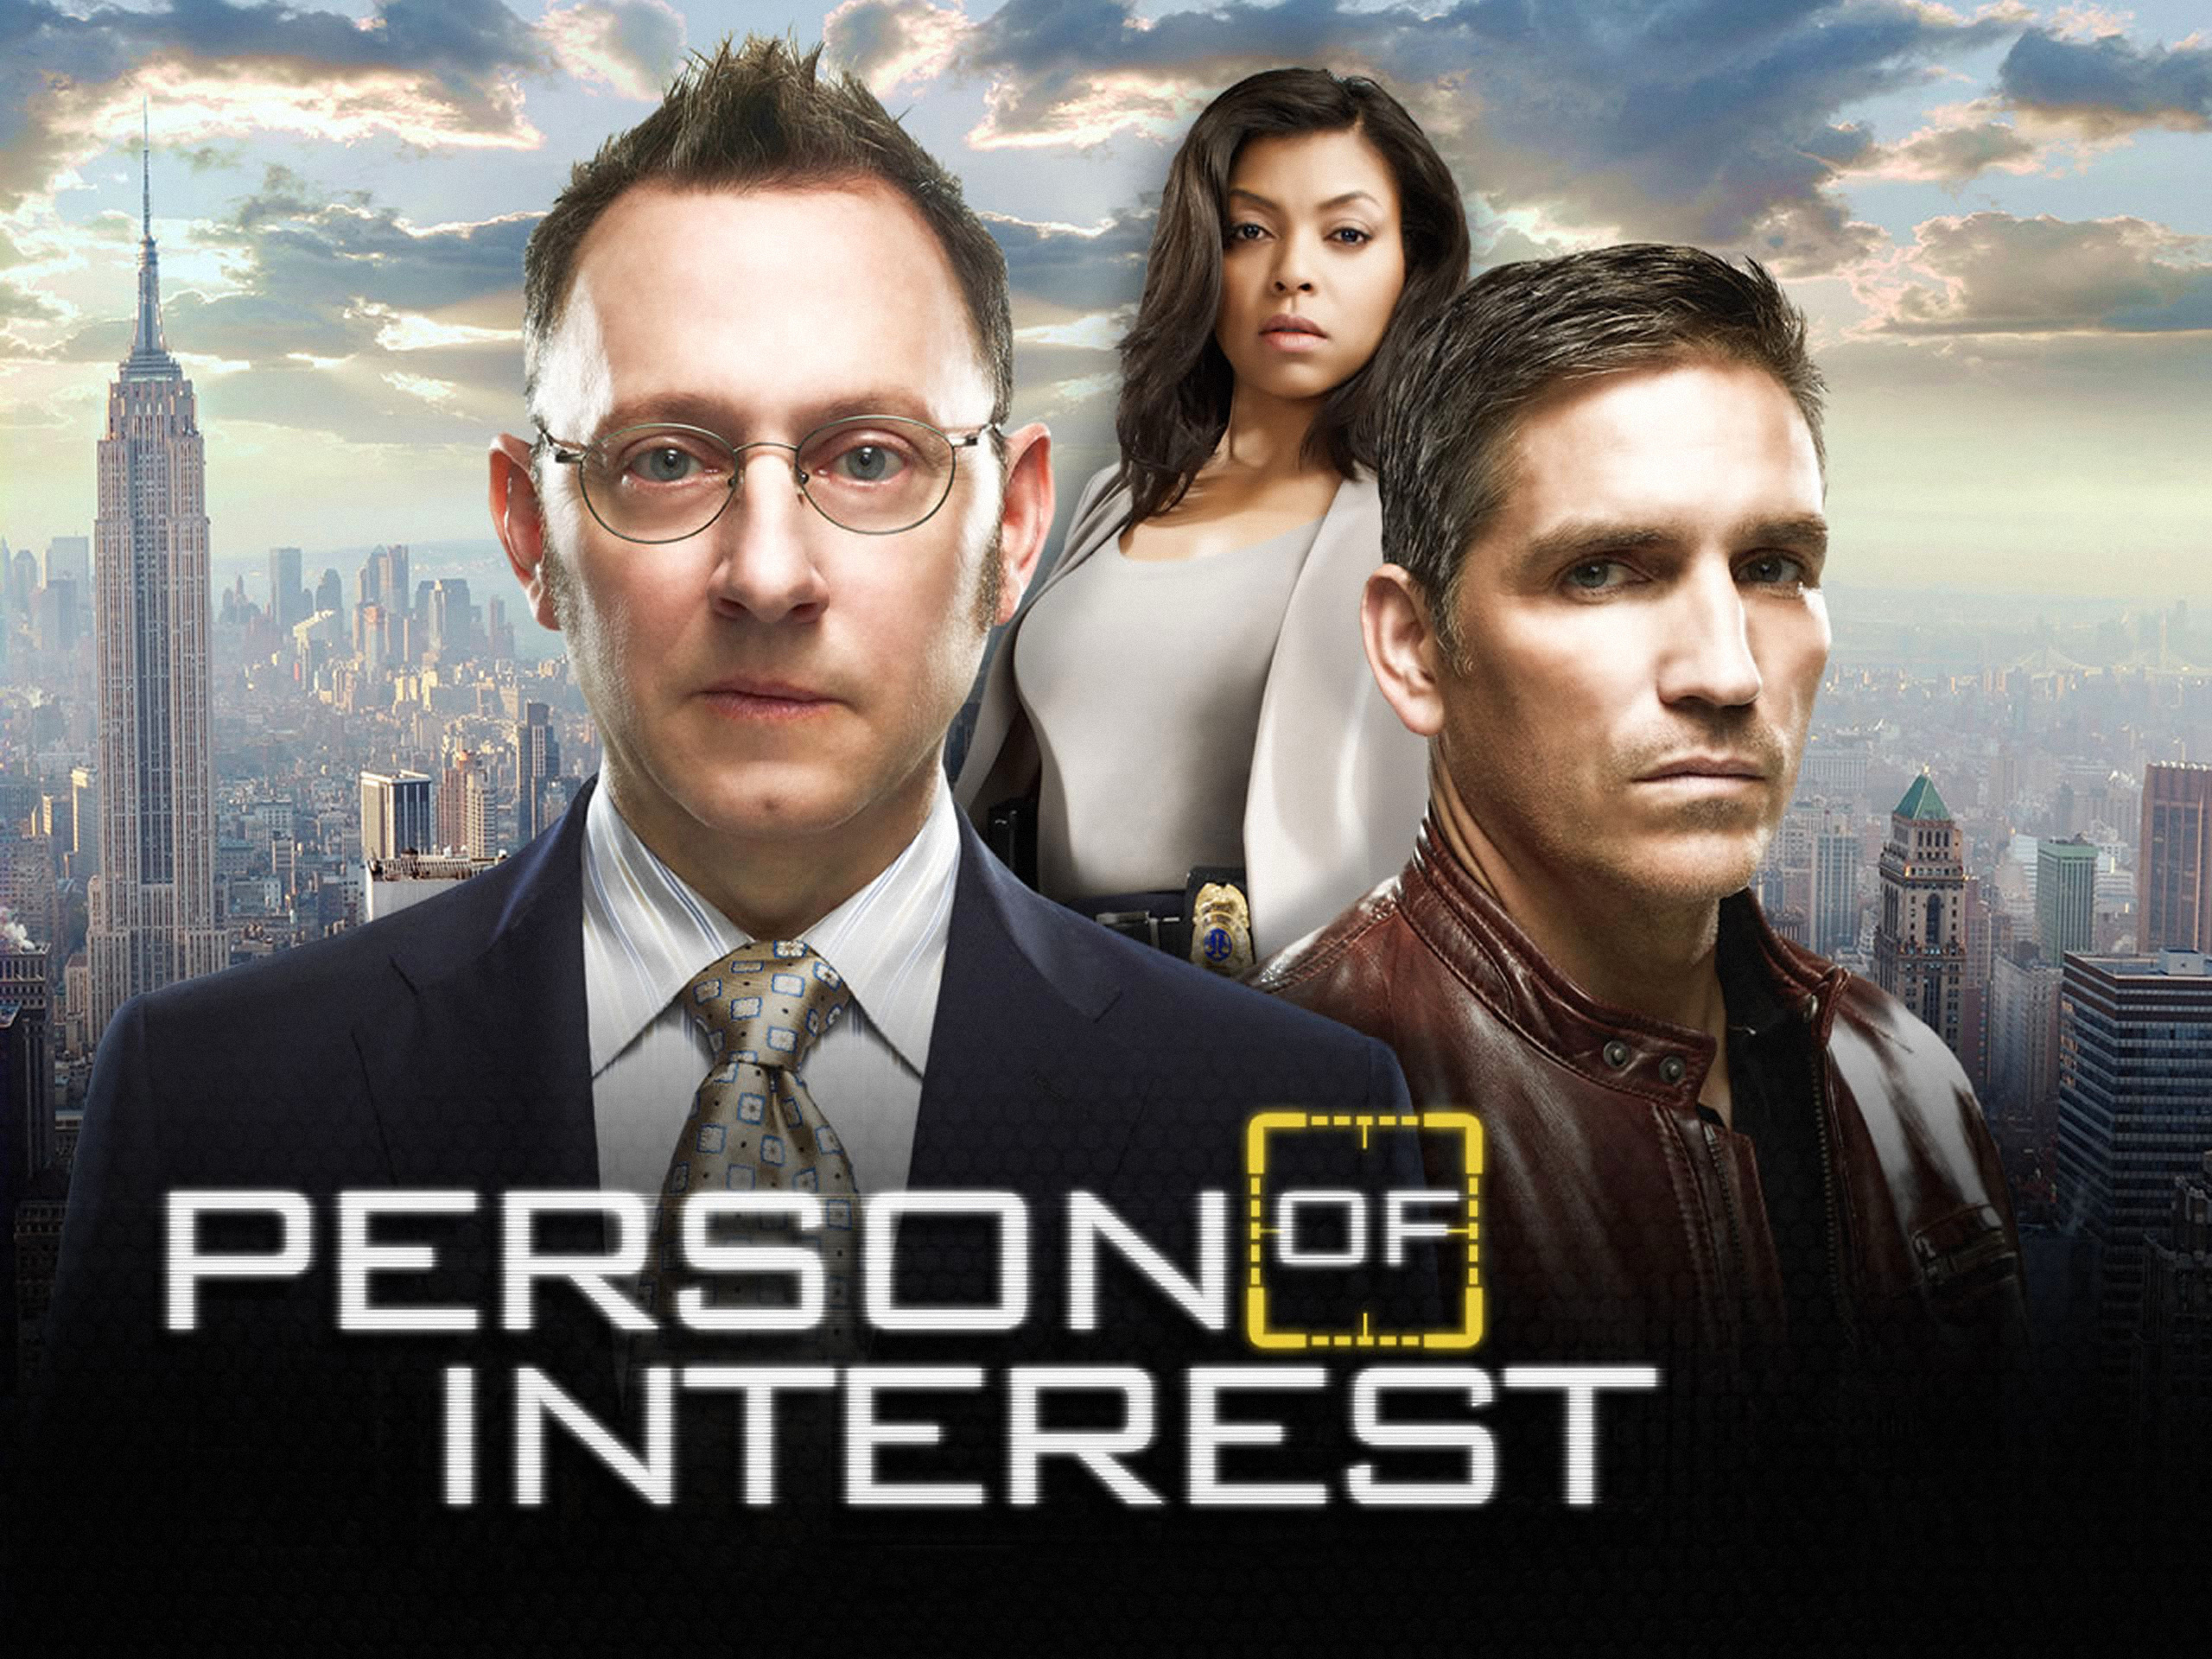 Person of Interest TV Series, Intriguing wallpapers, Maximumwallhd collection, Captivating images, 2560x1920 HD Desktop